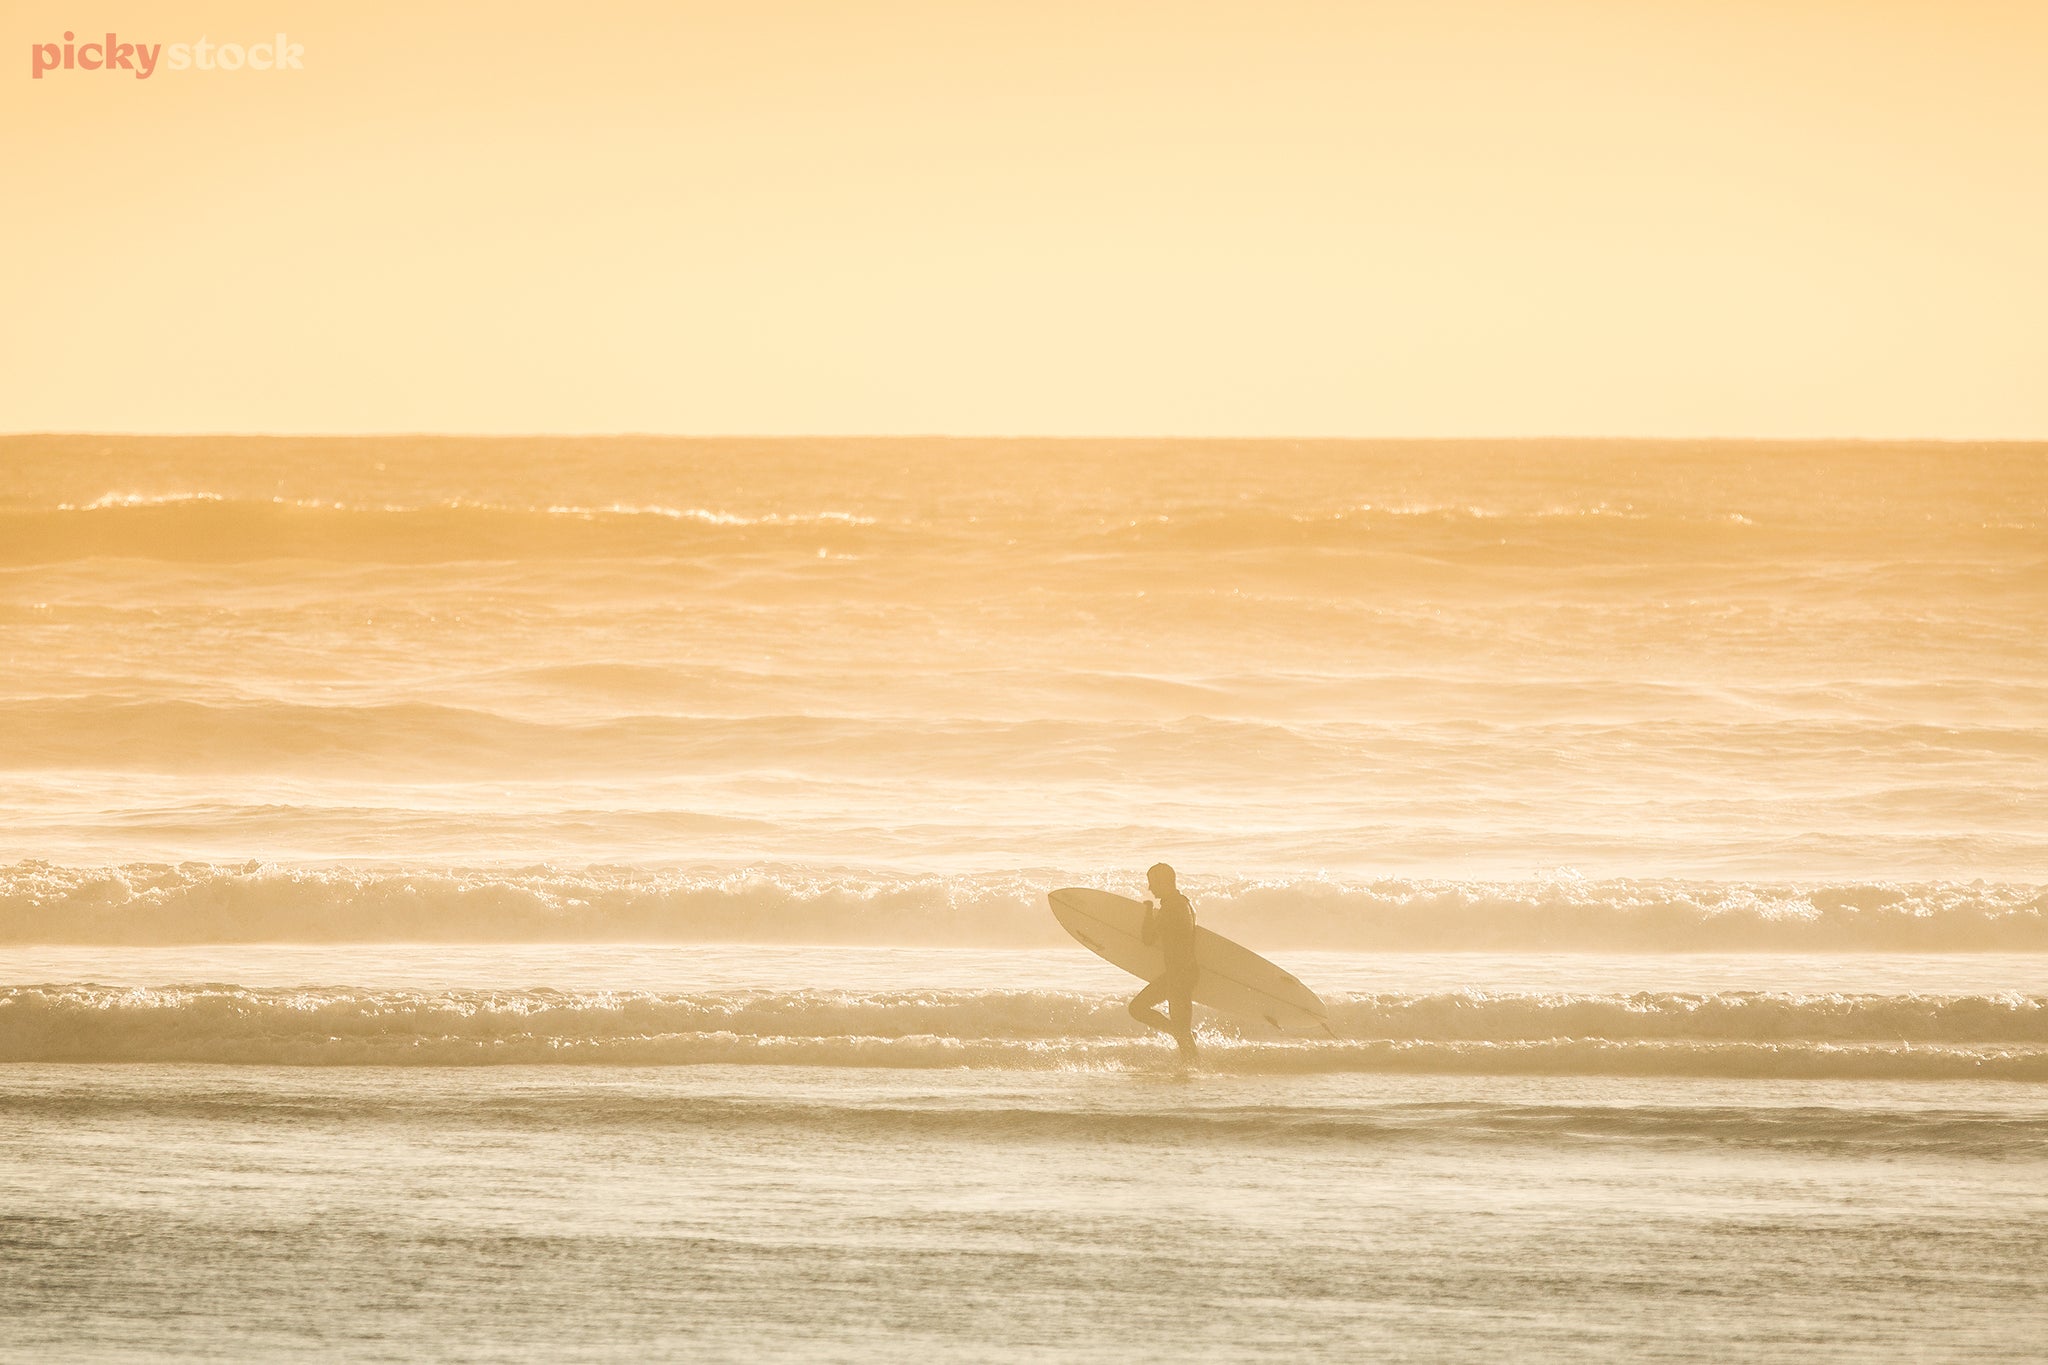 Landscape of a male surfer in a black wetsuit ruing across the beach as the tide breaks upon the shore, the hazy light of the sun blurs the image like exposed film.